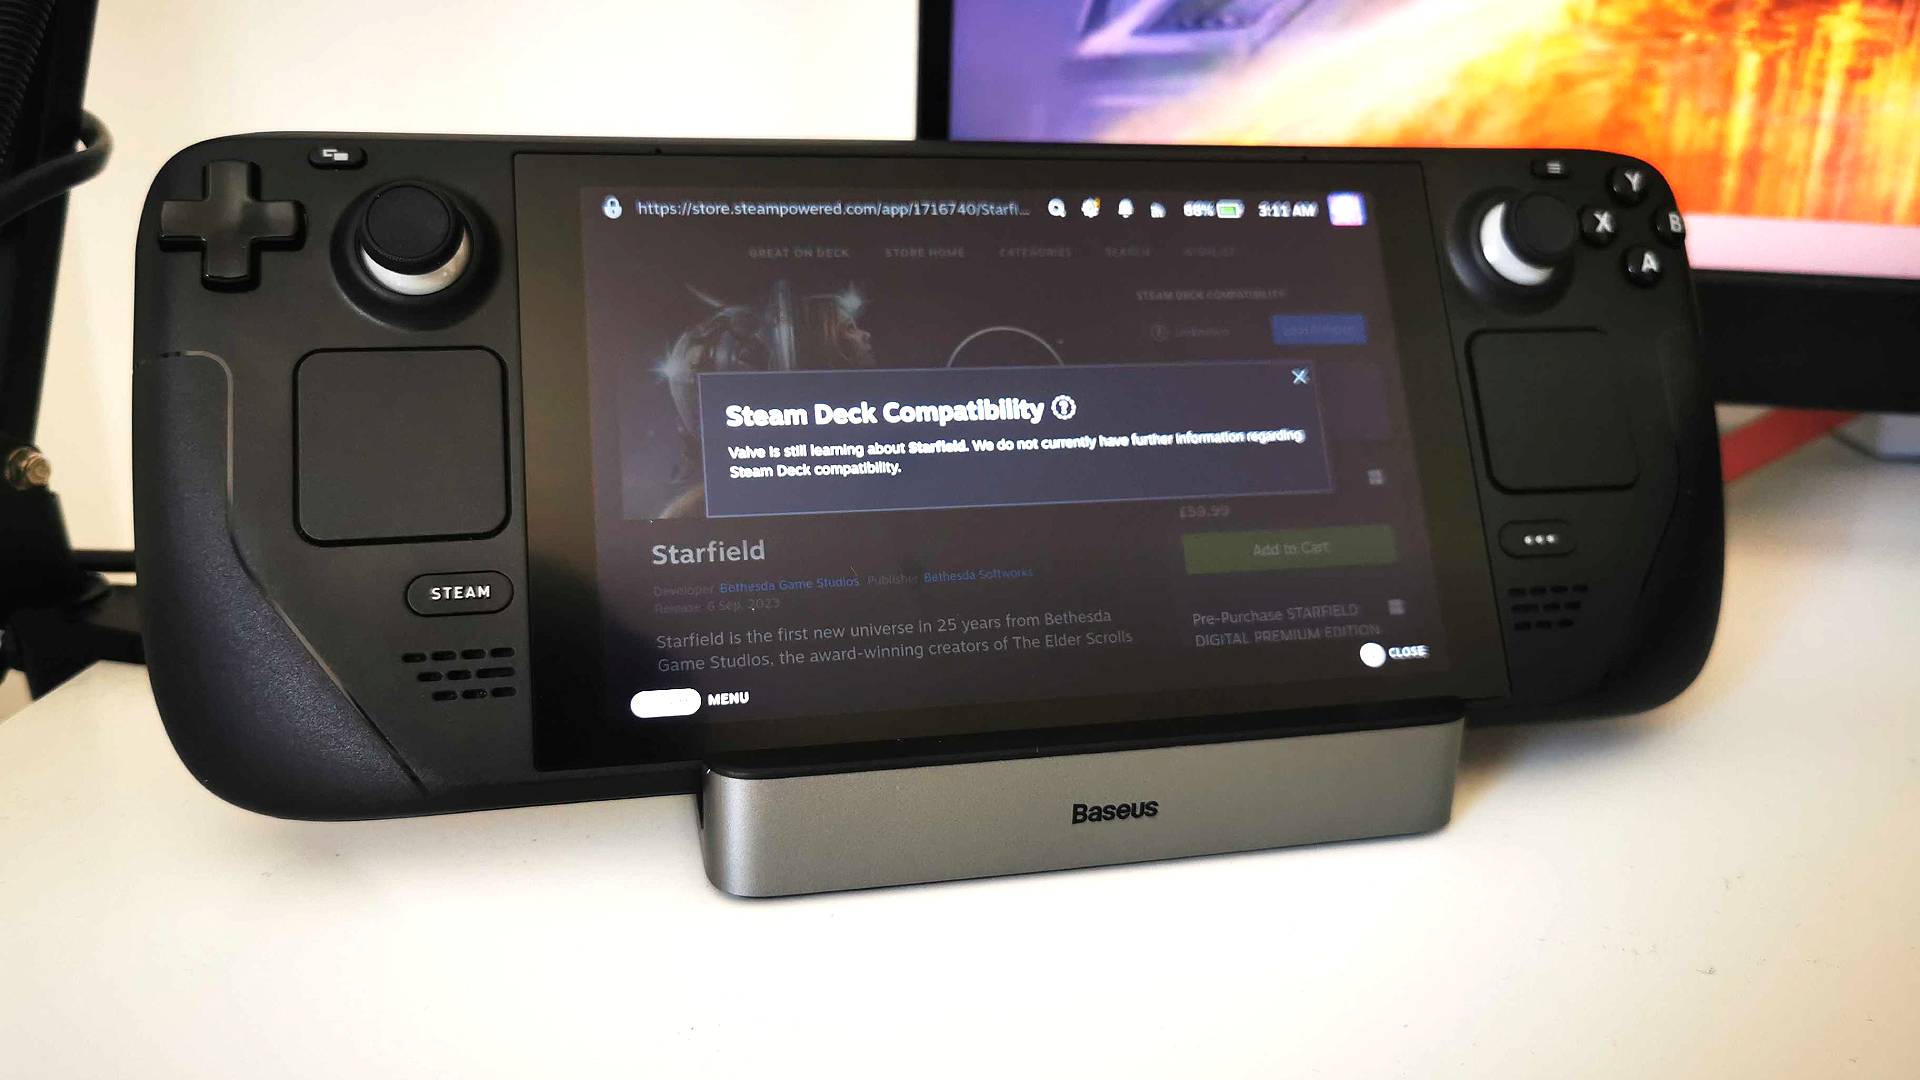 Steam Deck sitting on Baesus docking station with Starfield compatibility information on screen